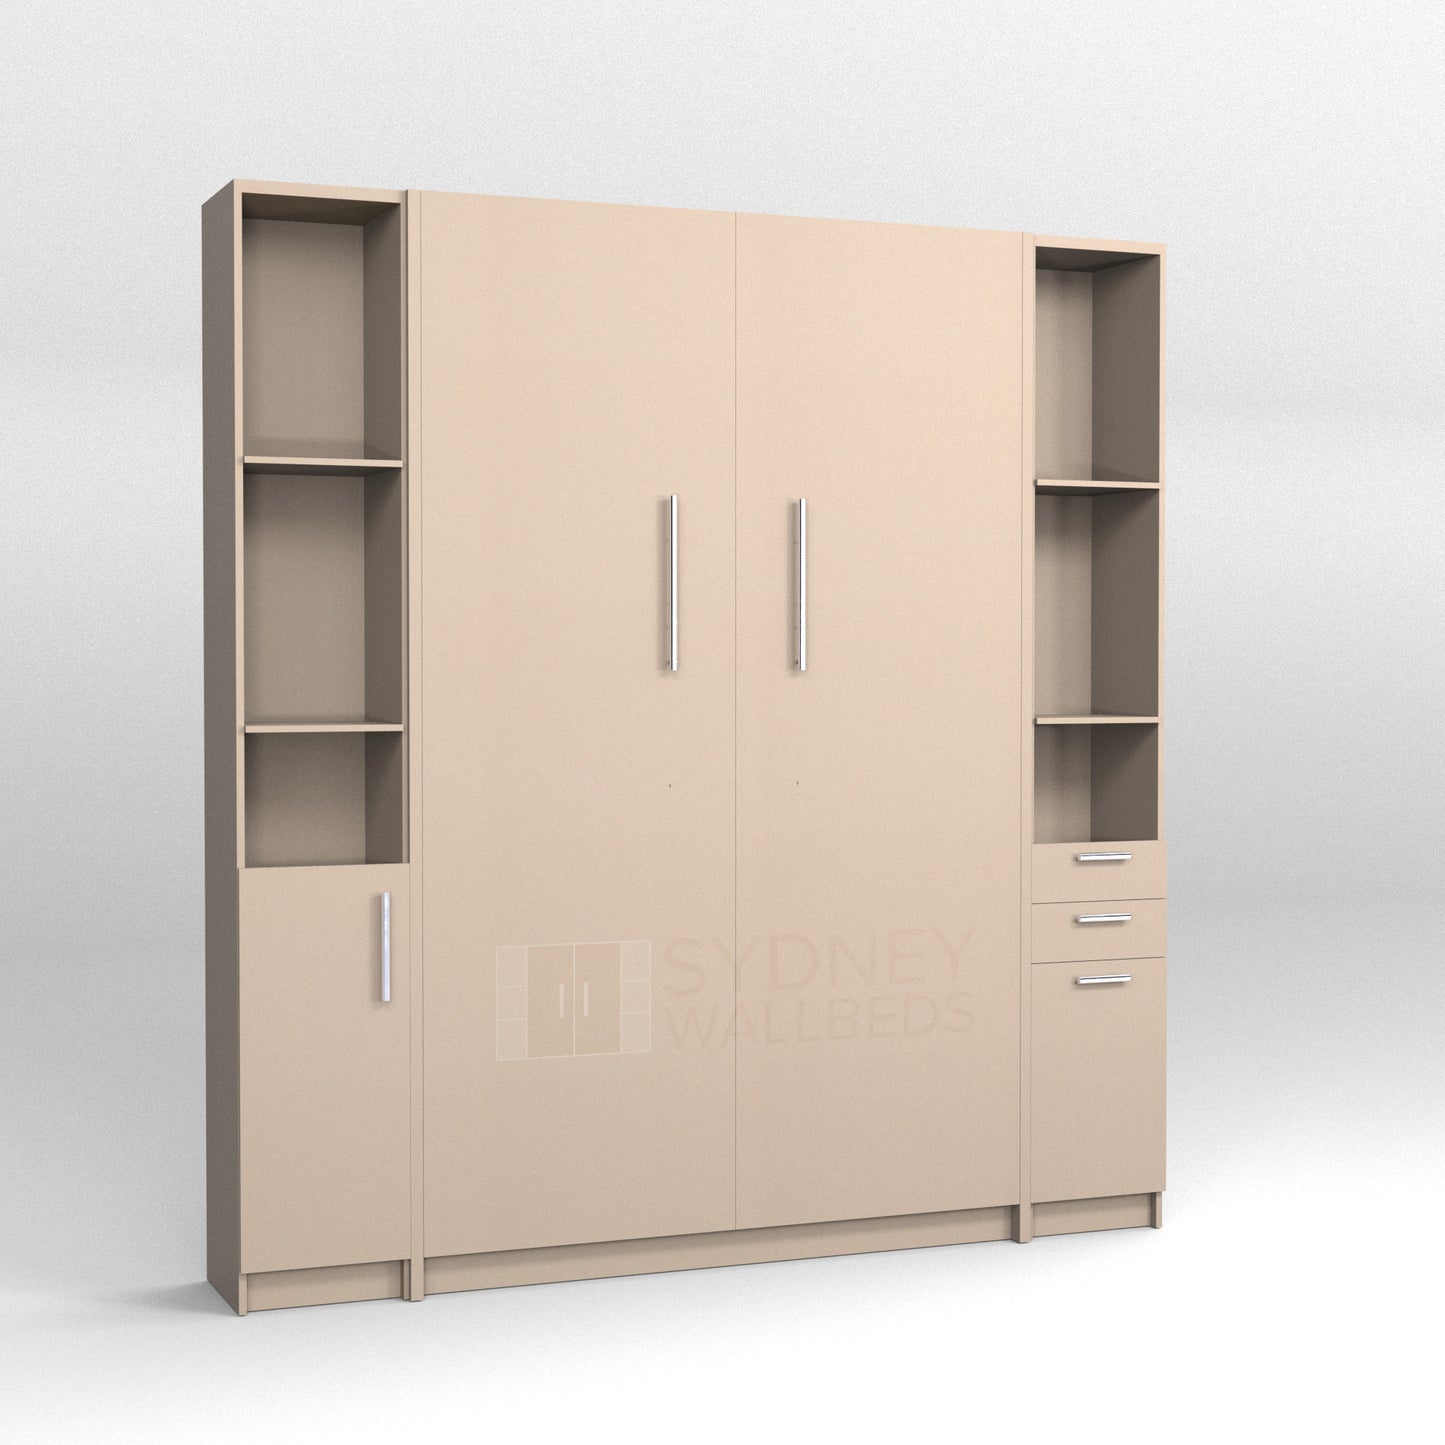 ALPHA WALLBED VERTICAL - (Double)